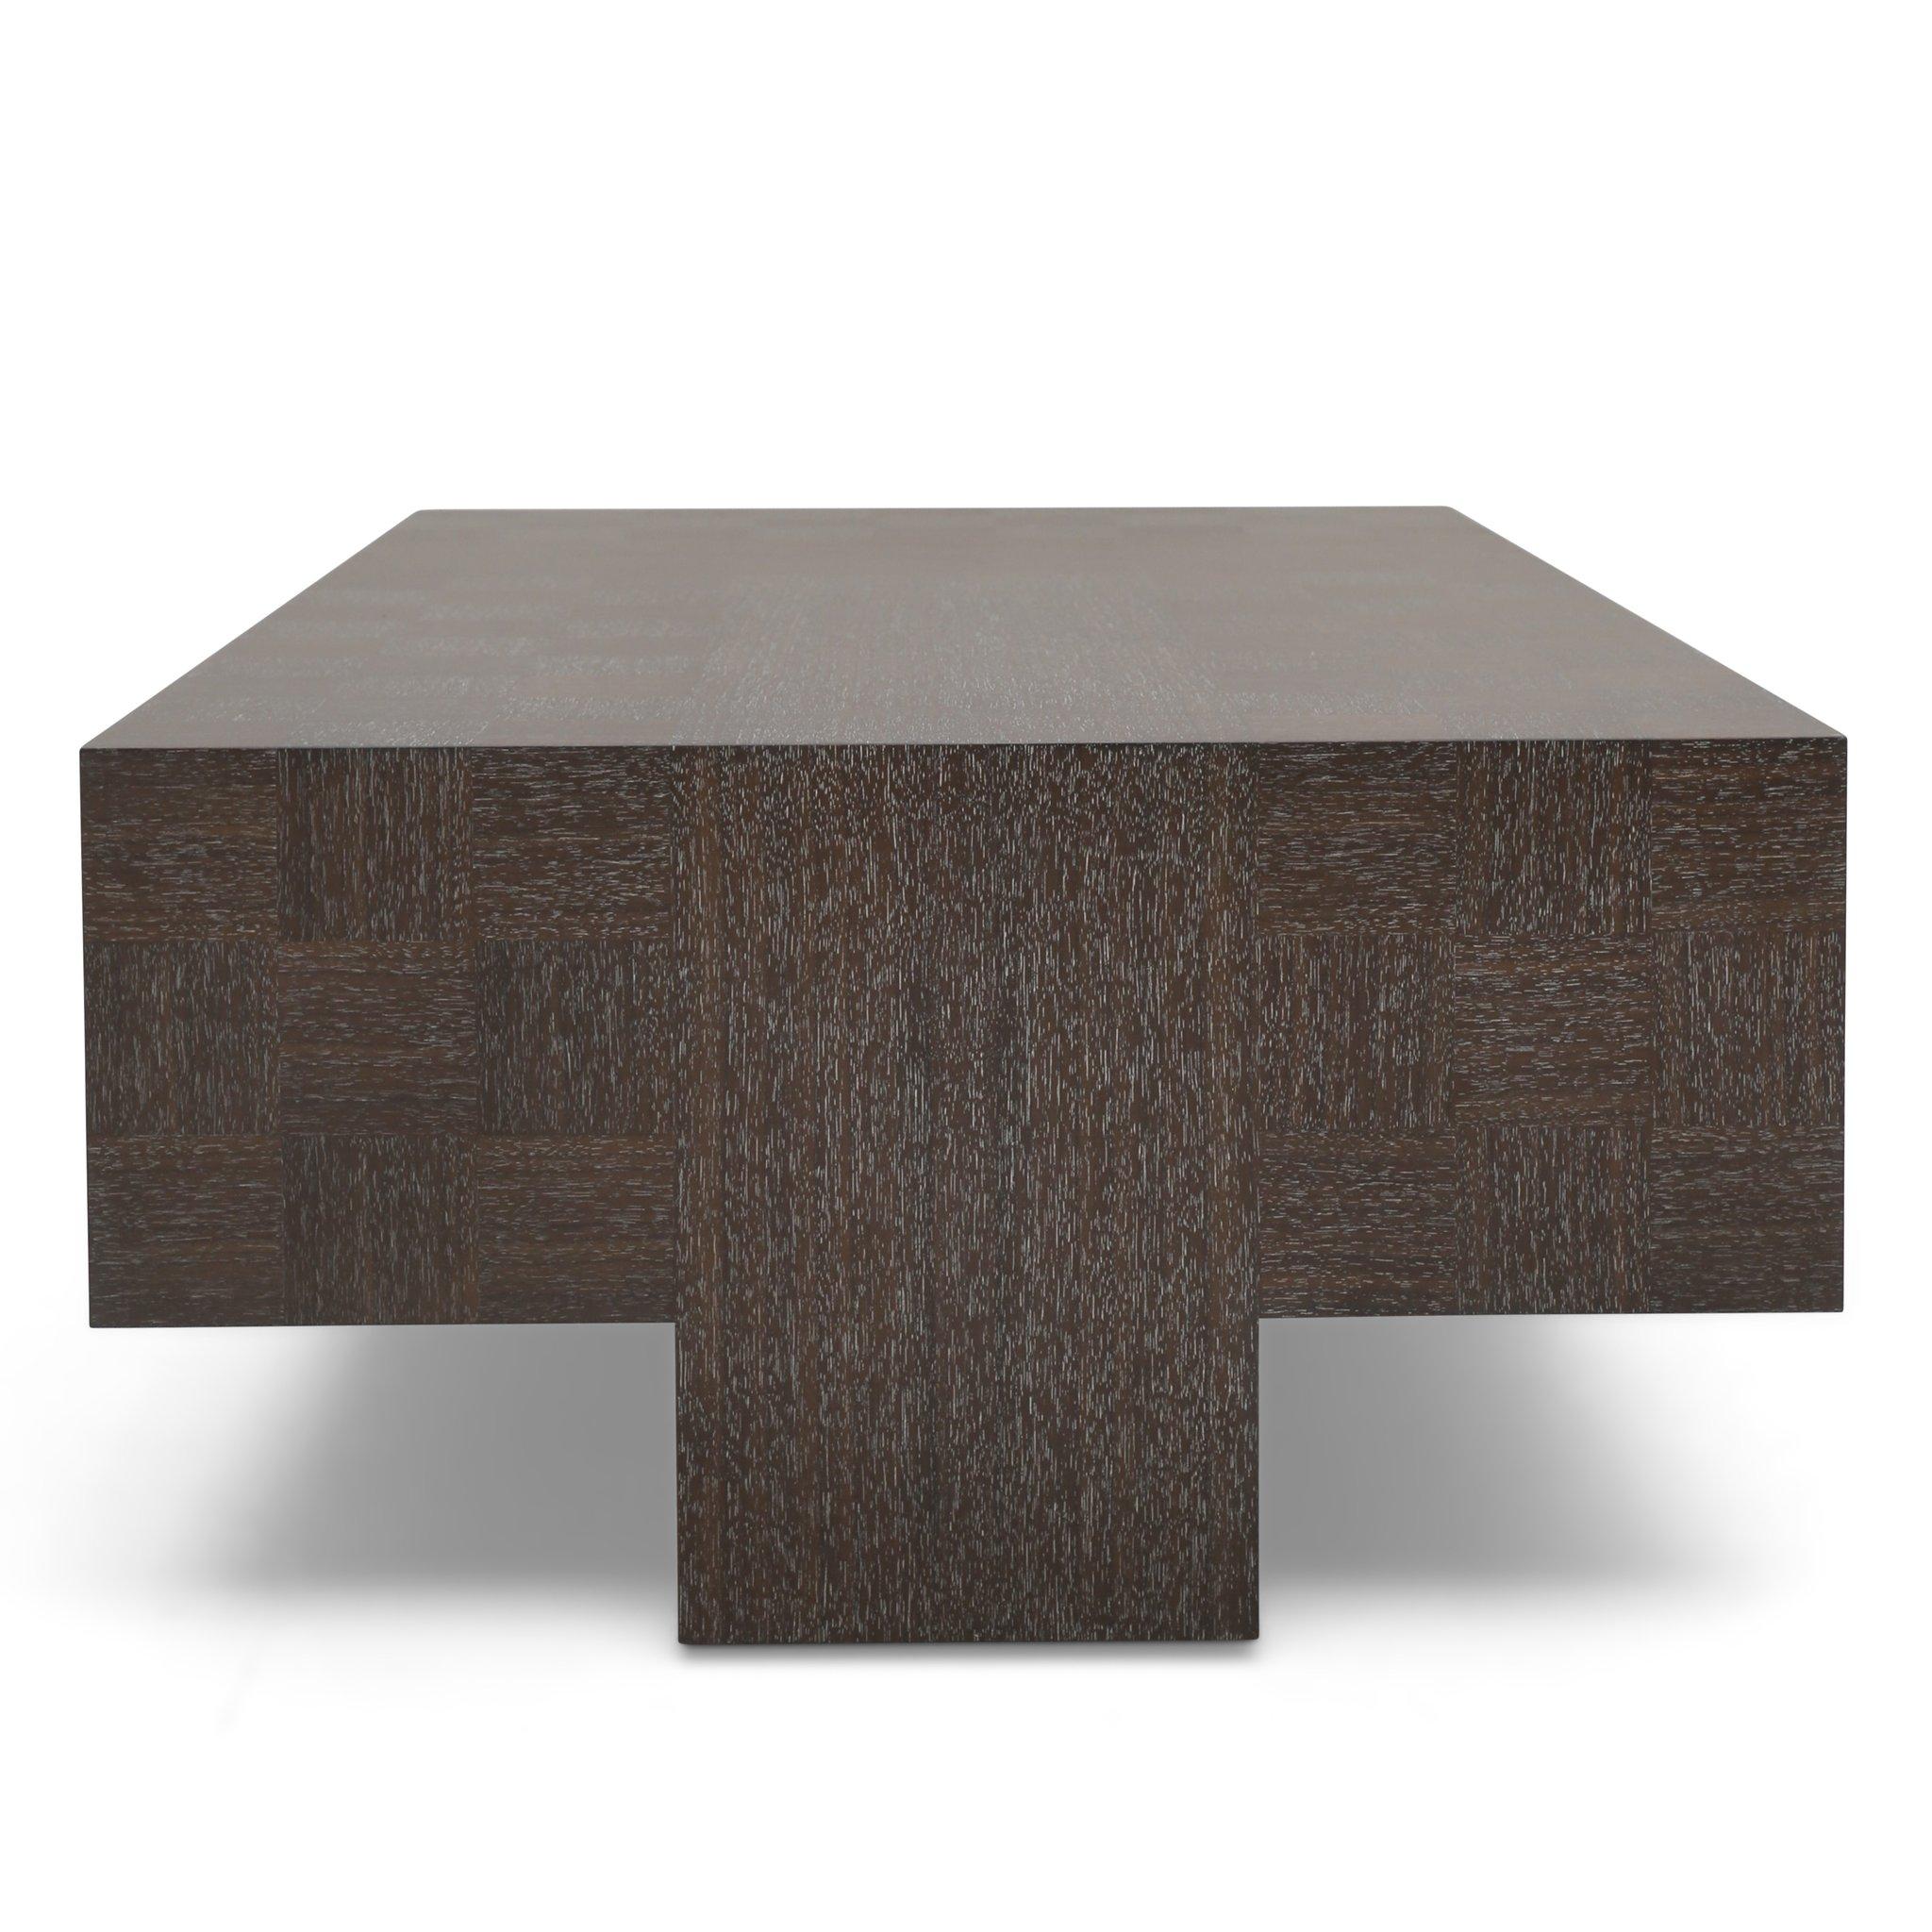 Quadra Coffee Table in Special Edition Cerused Quarter Sawn Walnut Finish In Excellent Condition For Sale In Deer Park, NY